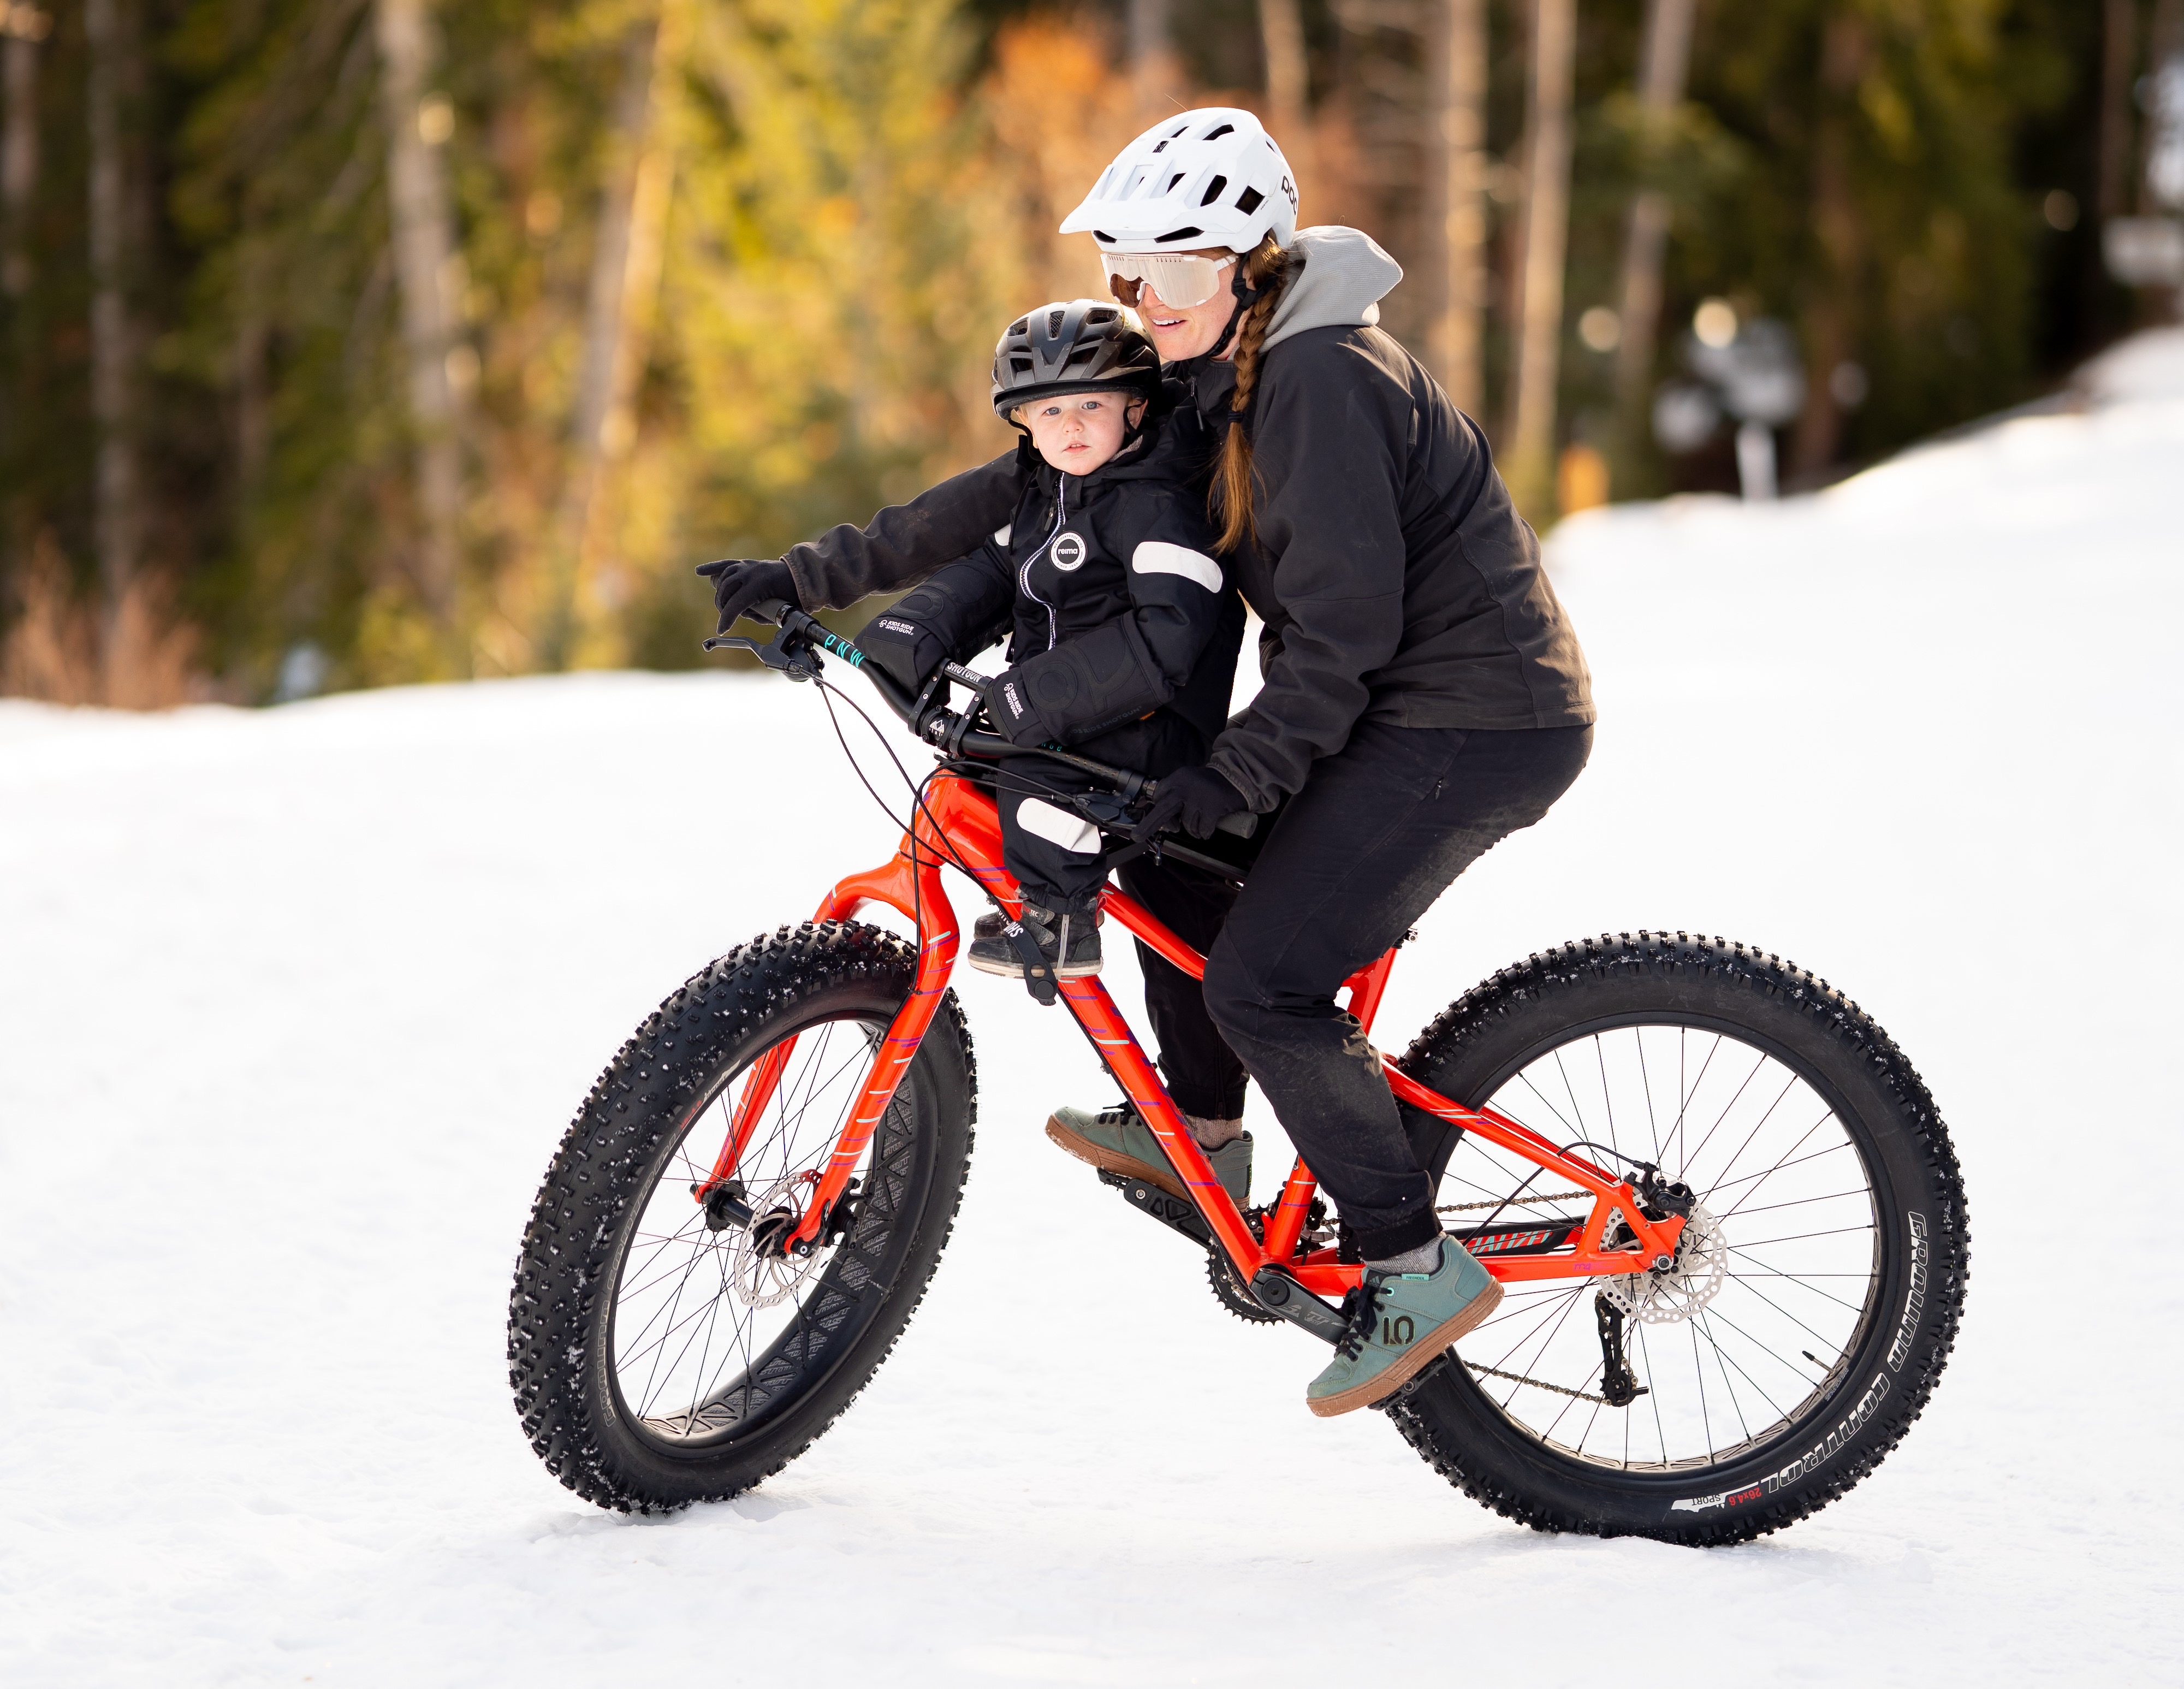 Riding fat bikes in the winter with young kids